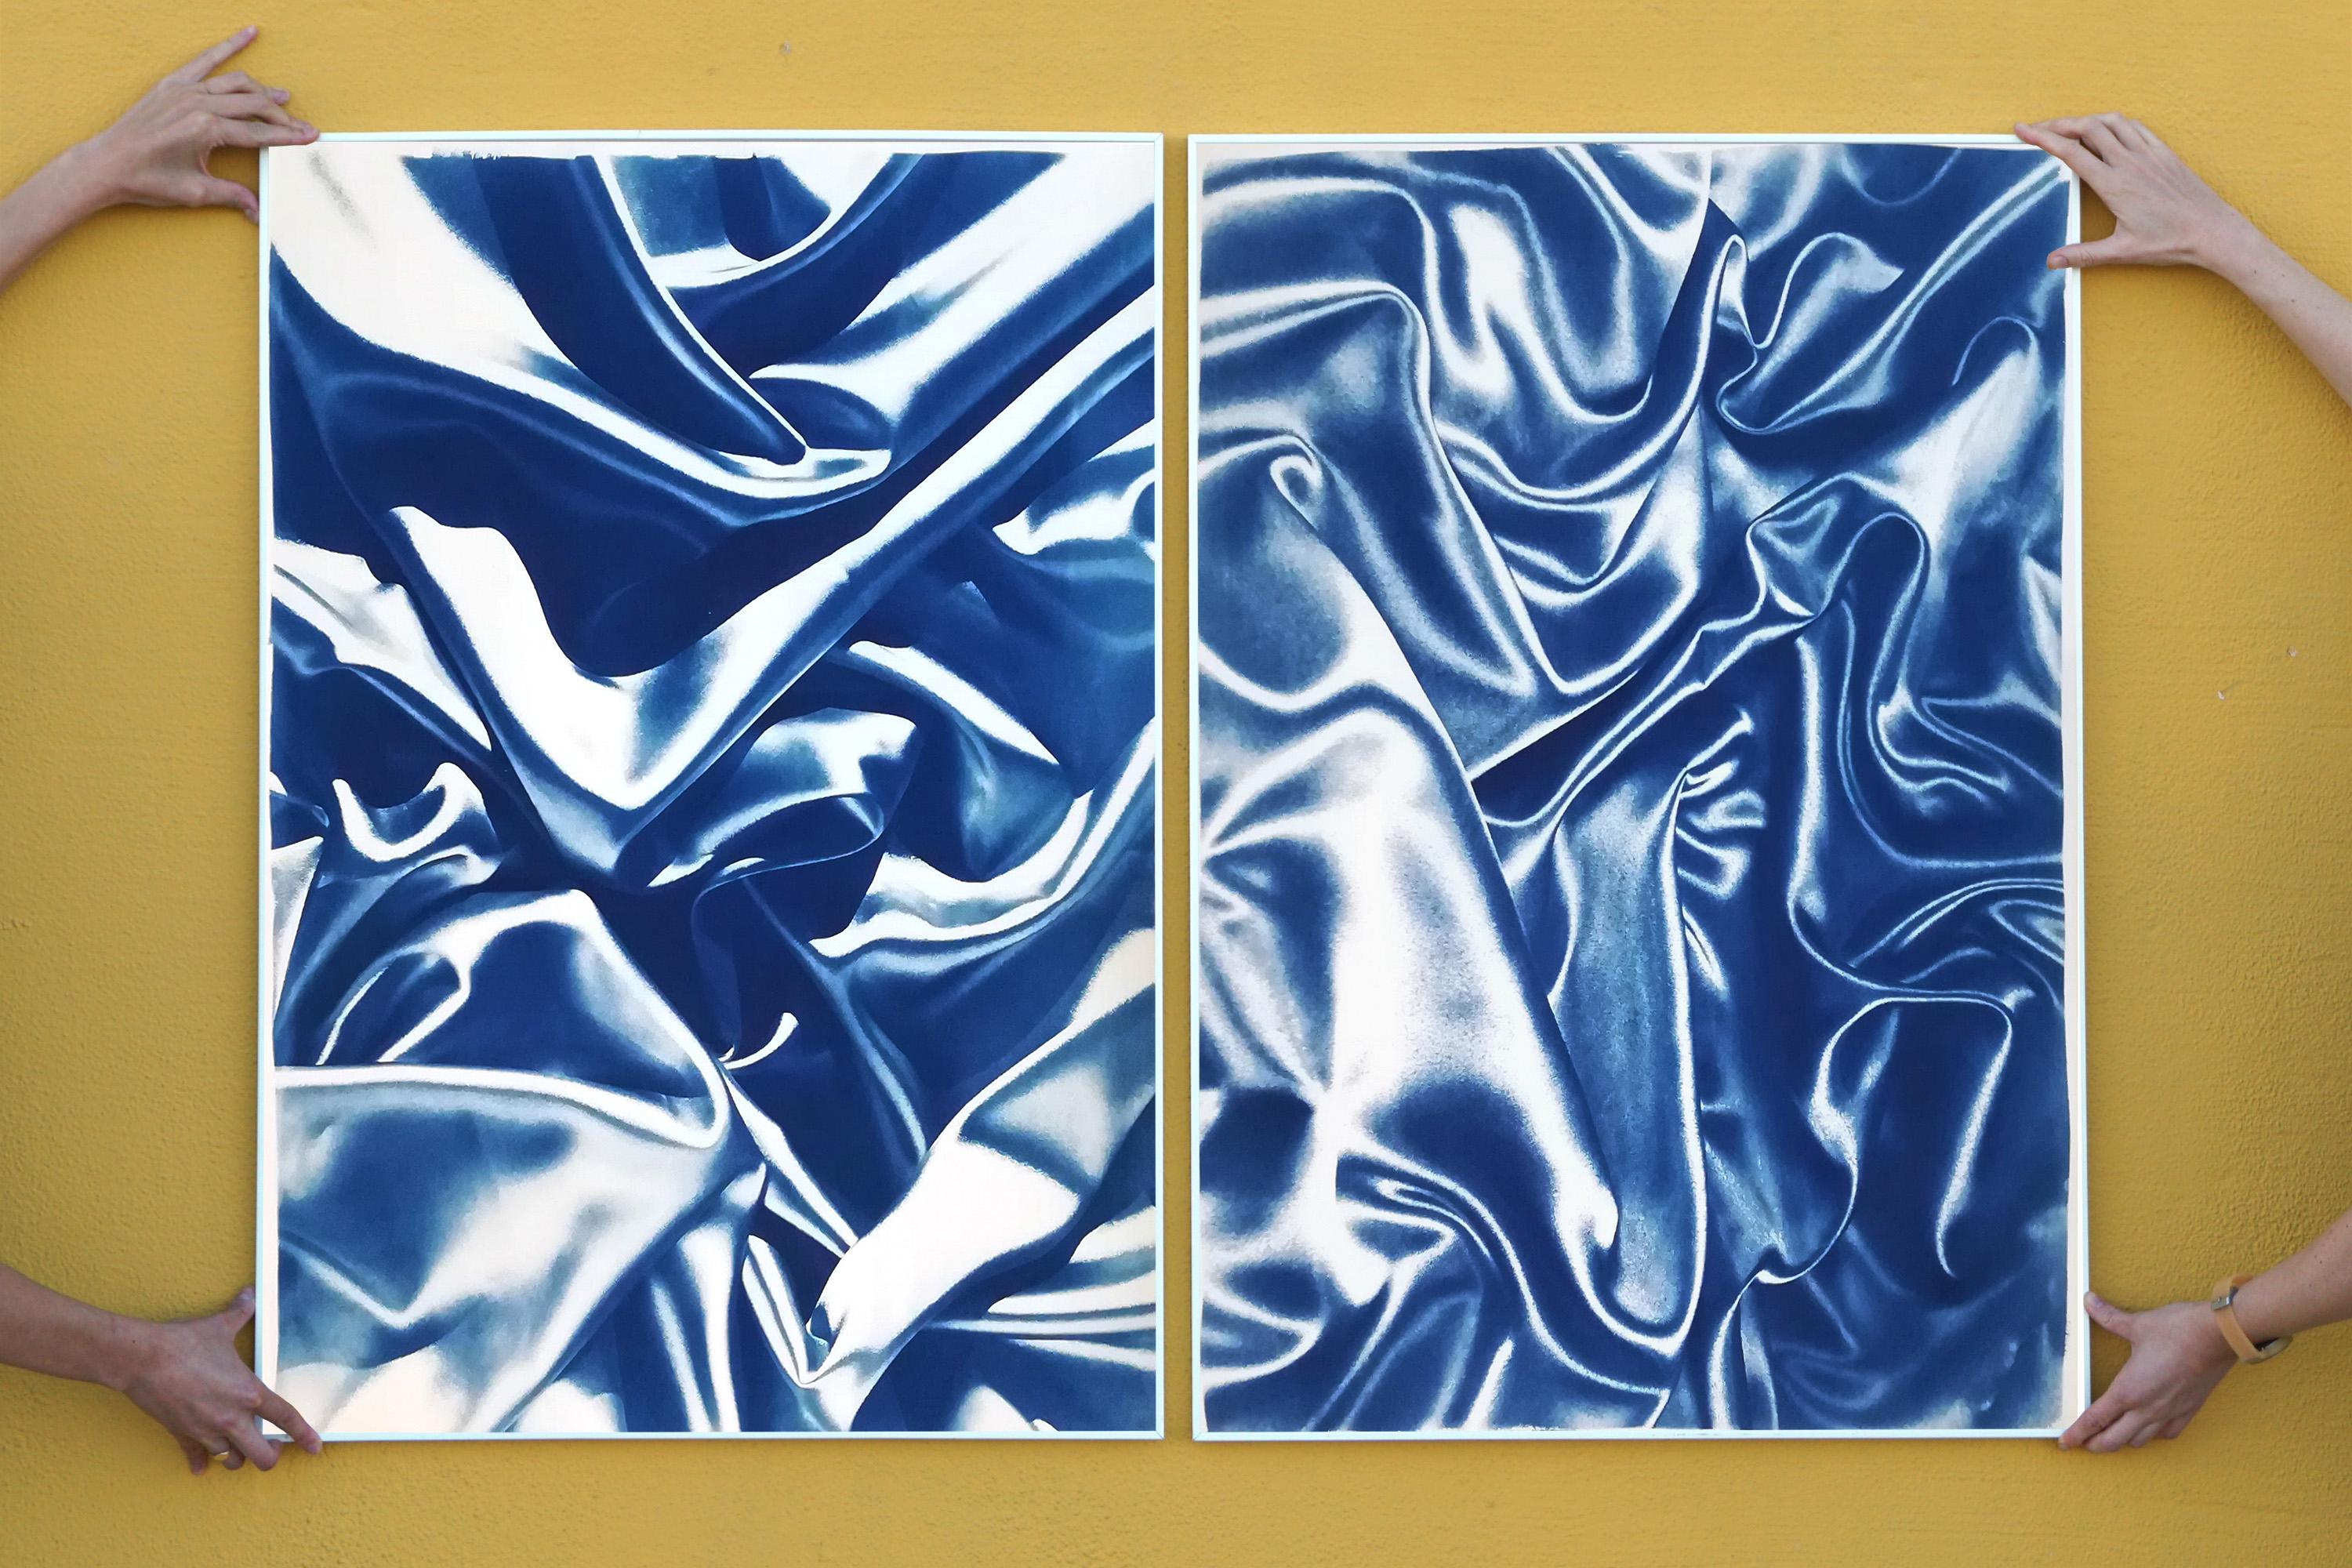 Late Night Adventurous Duo of Silks, Cyanotype Diptych on Watercolor Paper  - Contemporary Painting by Kind of Cyan